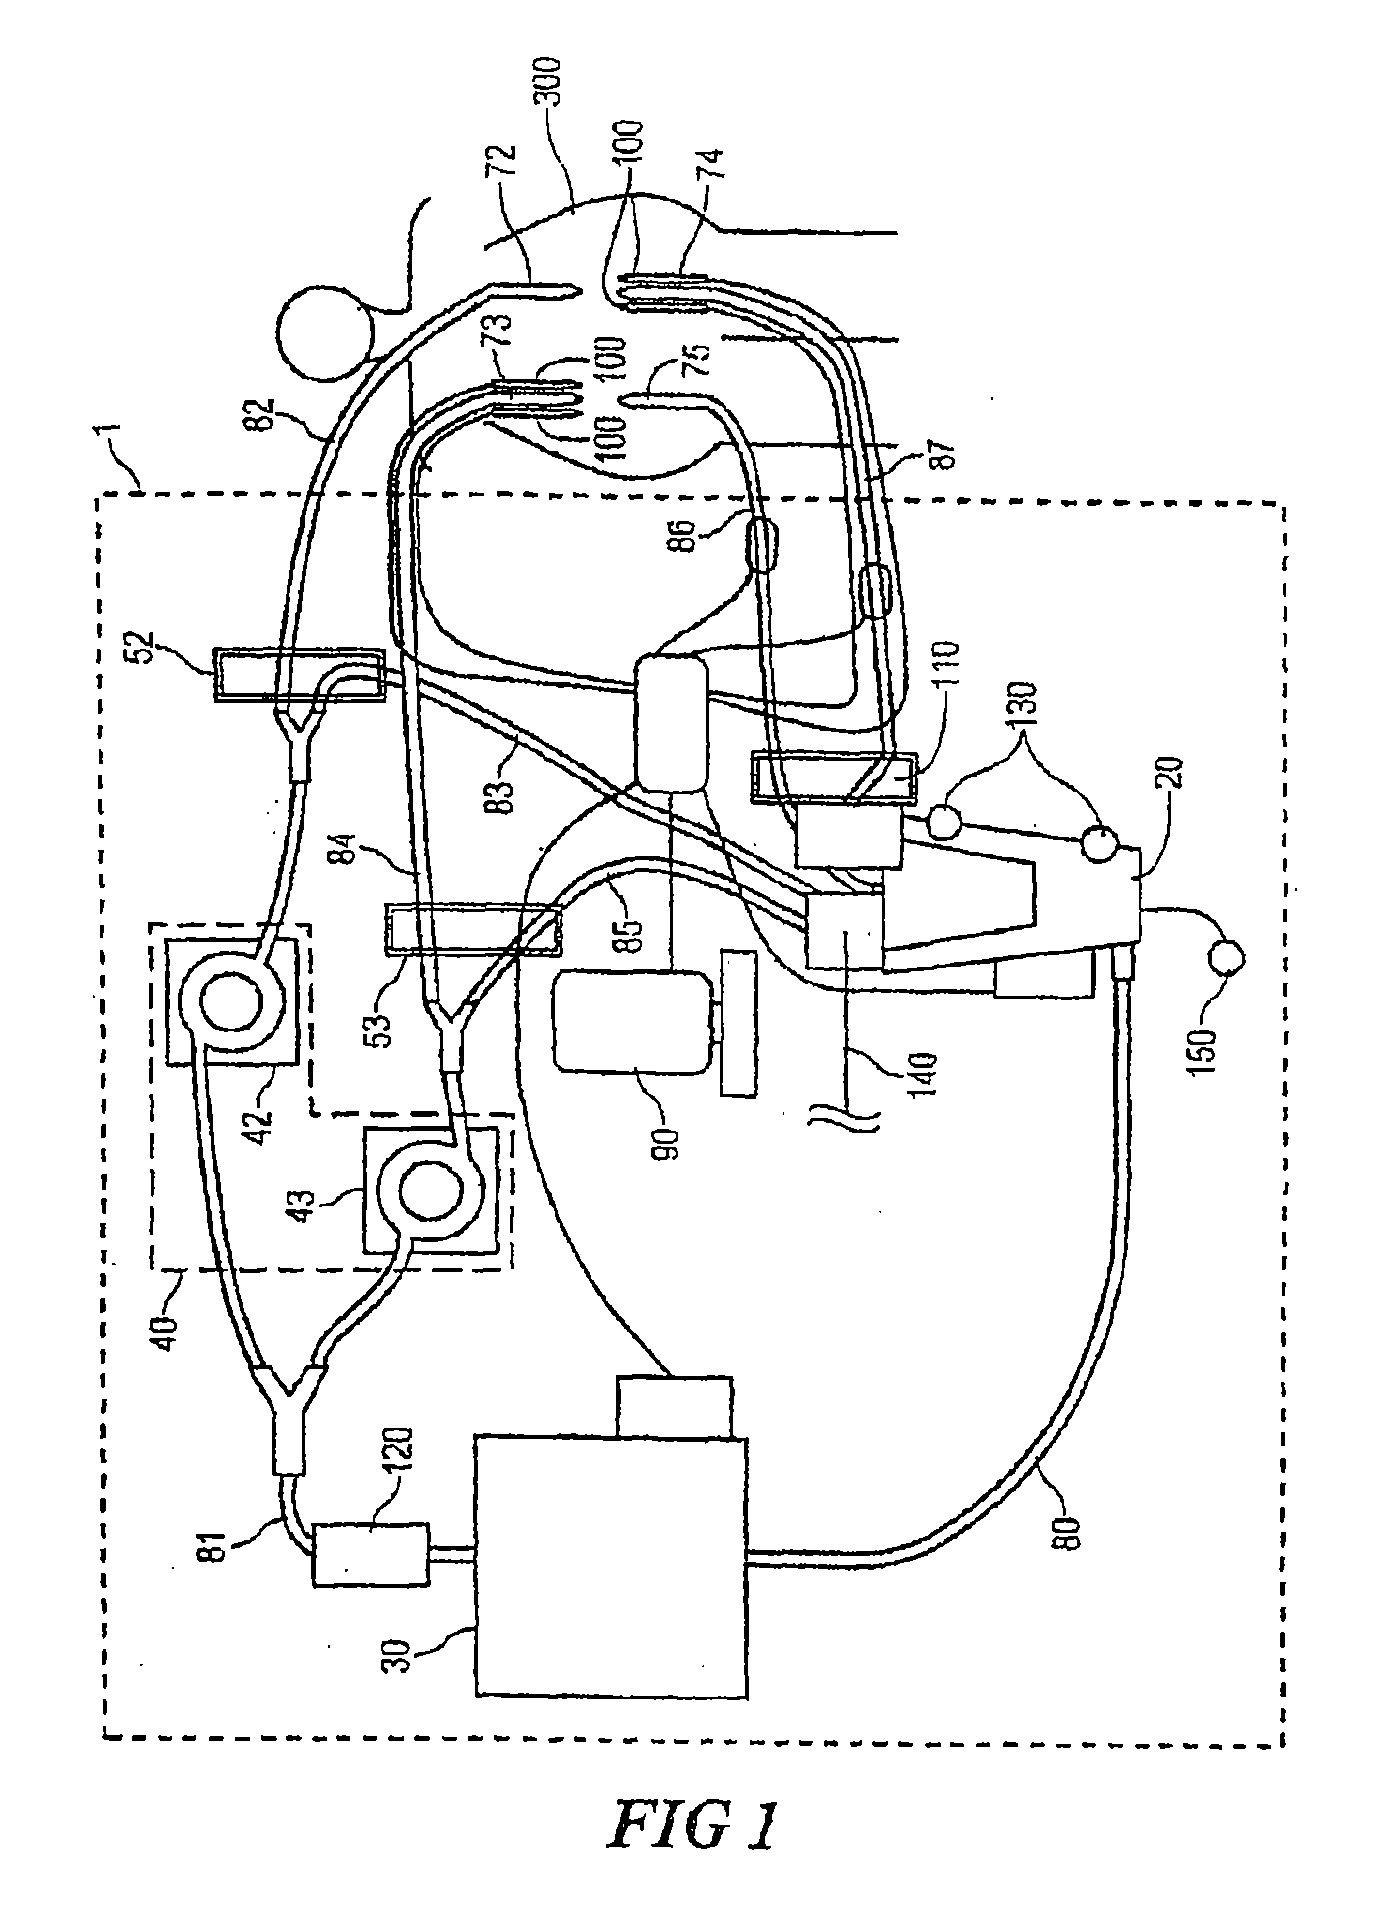 System for chemohyperthermia treatment